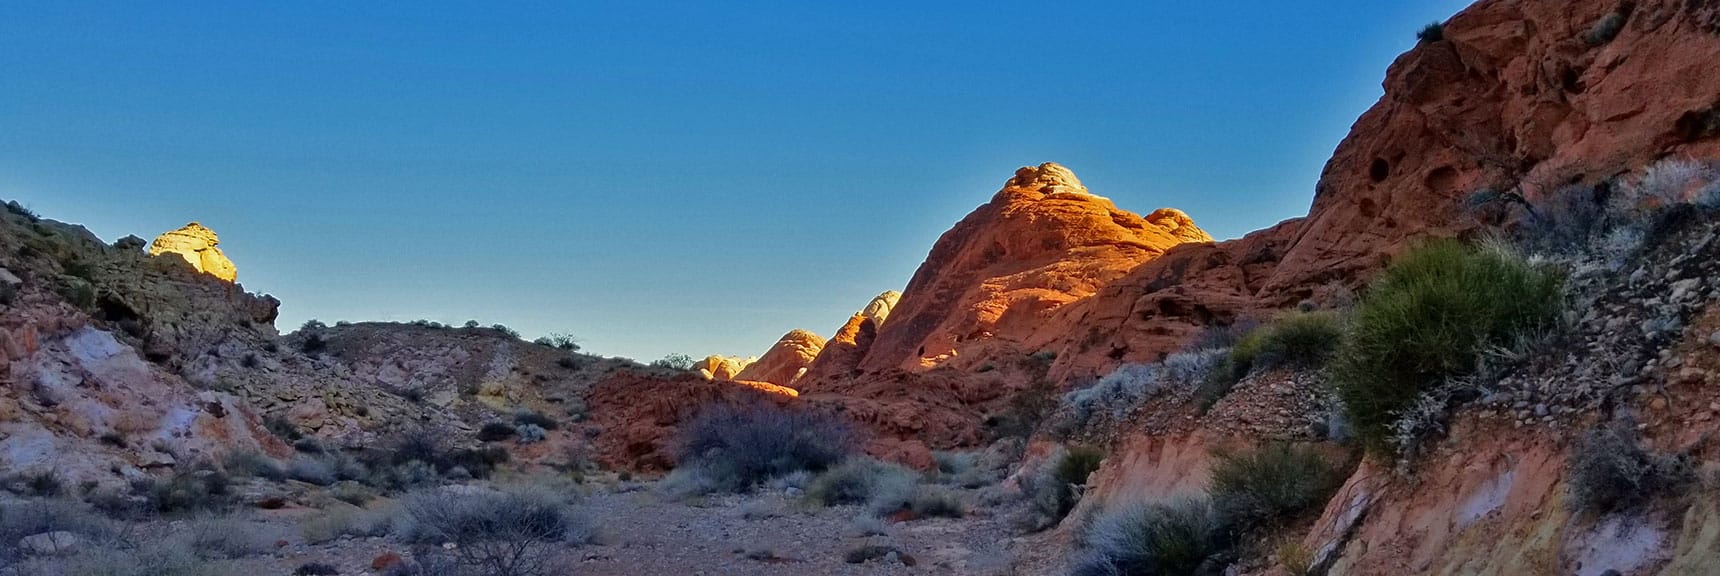 White Domes Coming into View on Prospect Trail in Valley of Fire State Park, Nevada